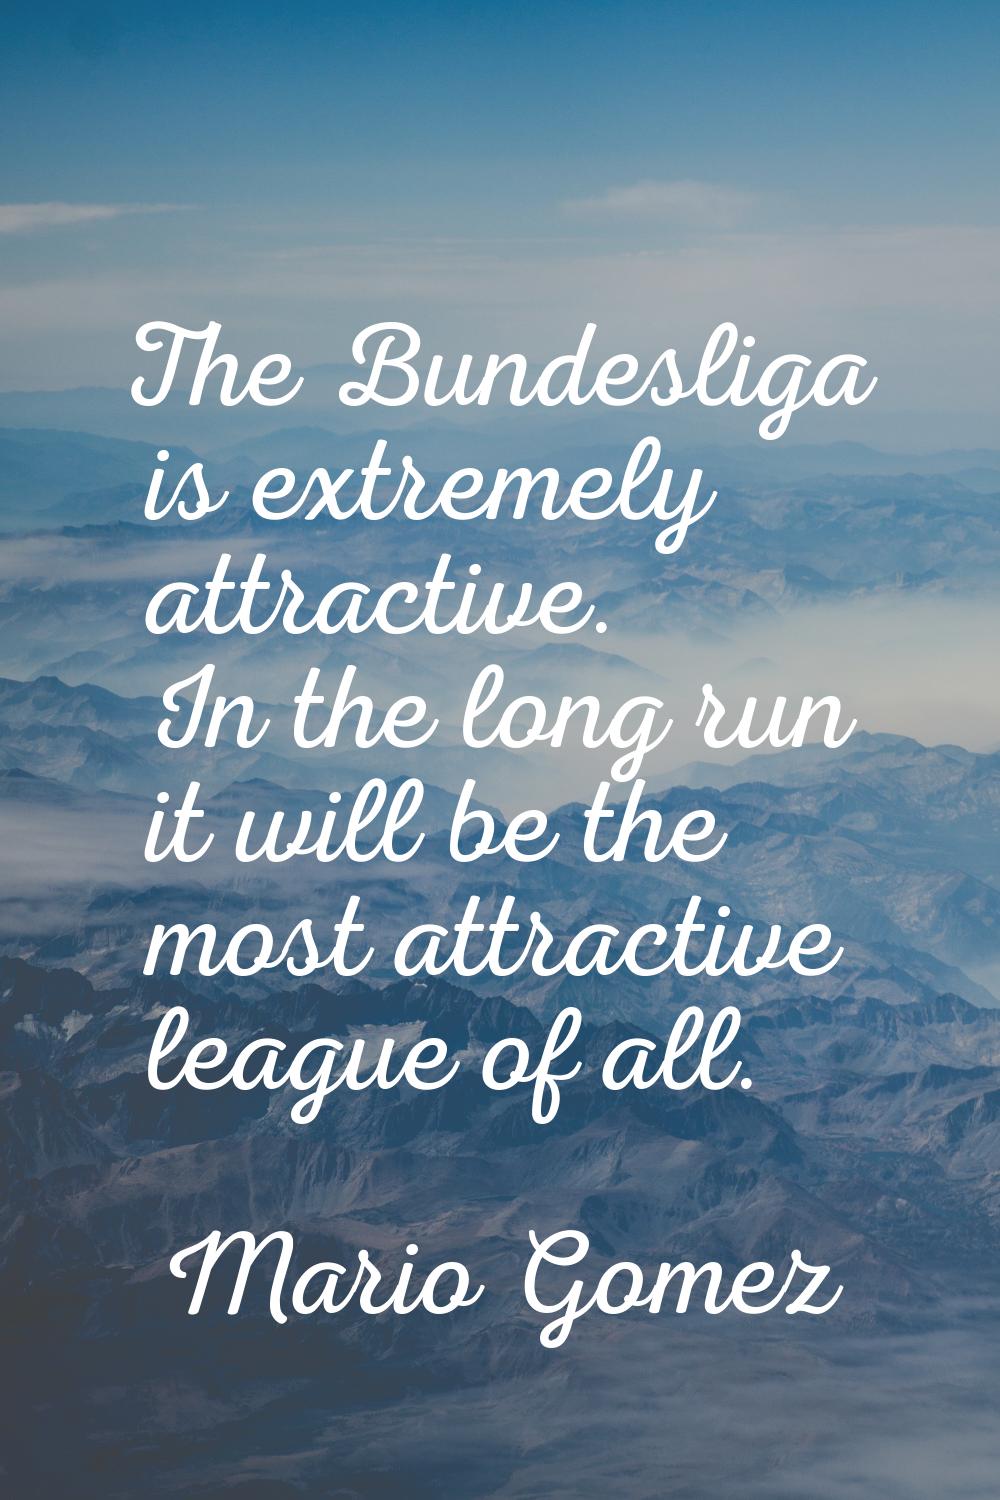 The Bundesliga is extremely attractive. In the long run it will be the most attractive league of al